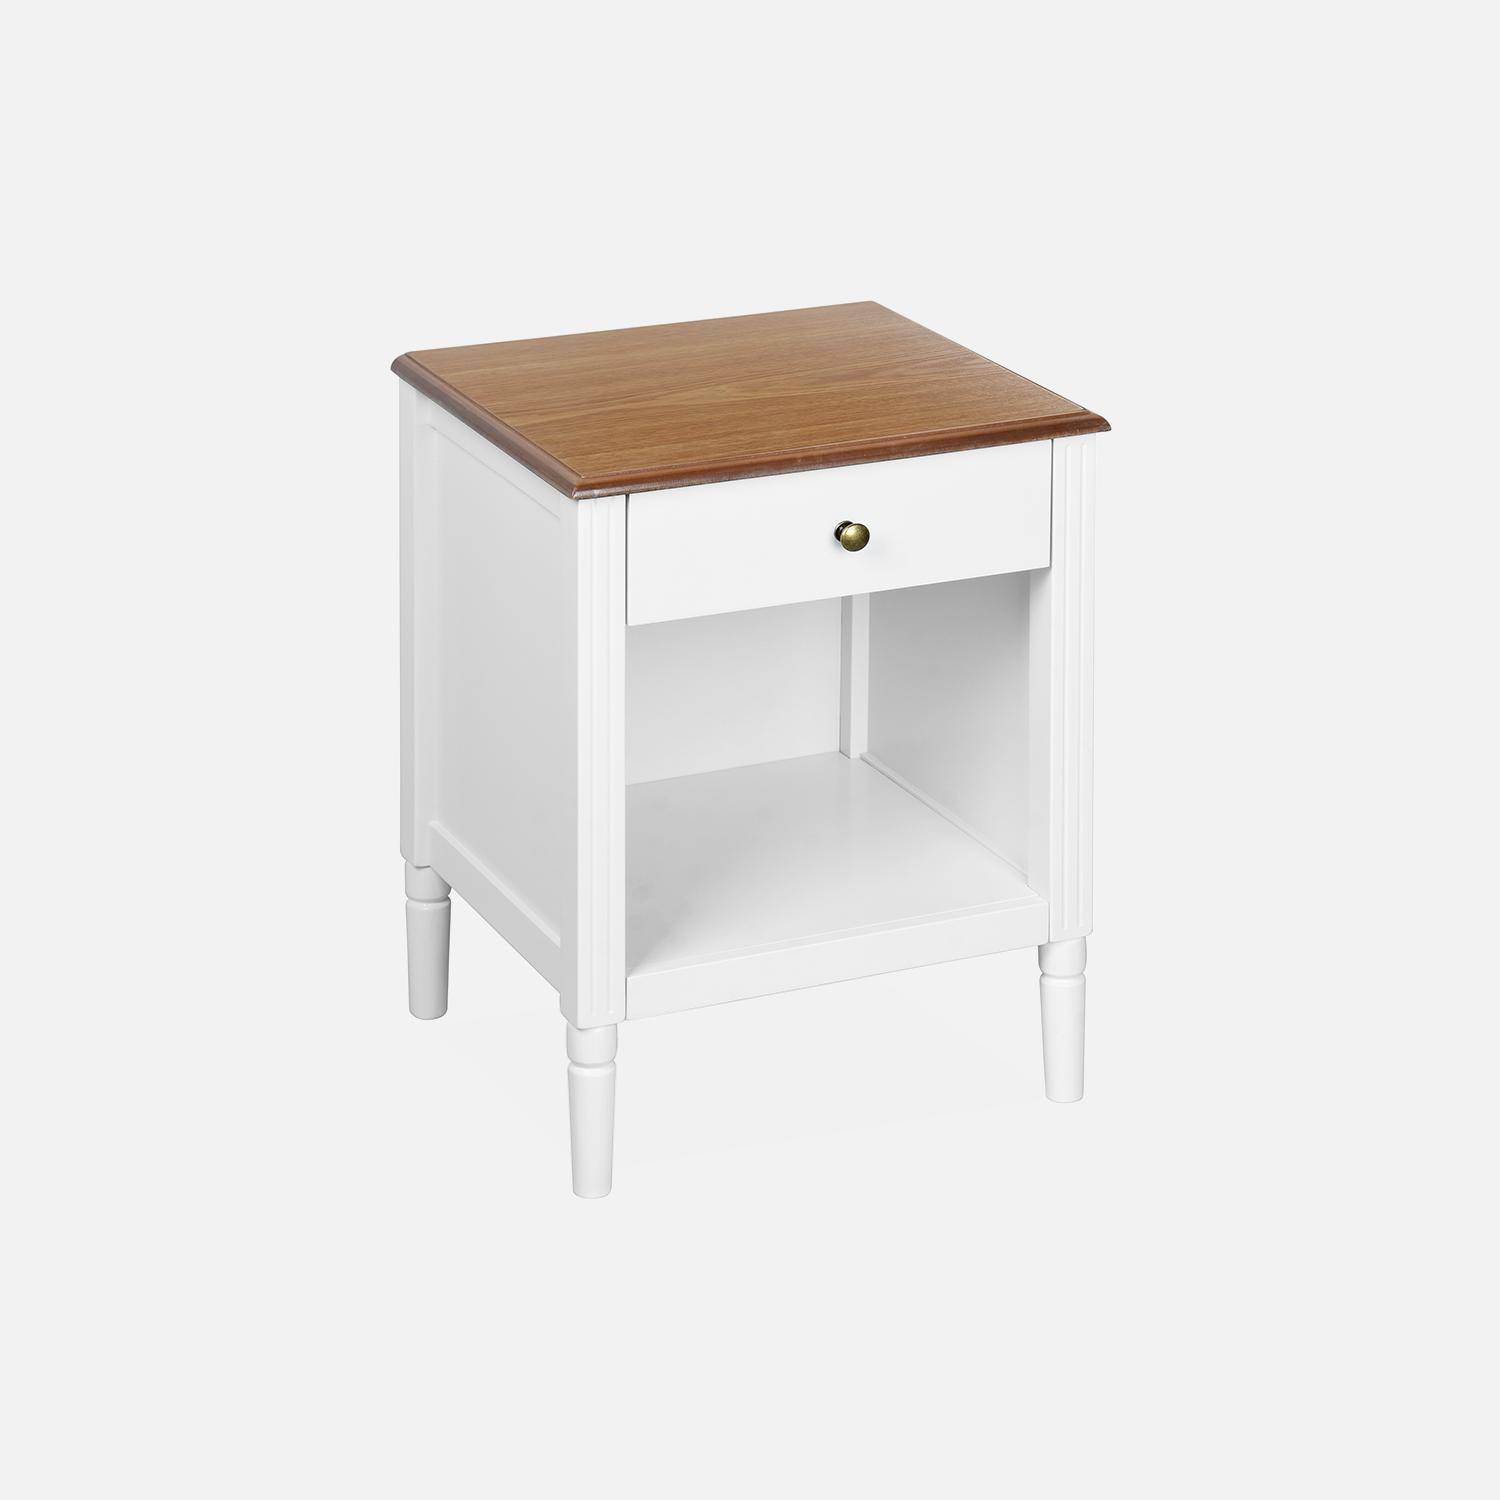 Bedside table with pinewood legs, 45x40x60cm - Celeste - White Photo3